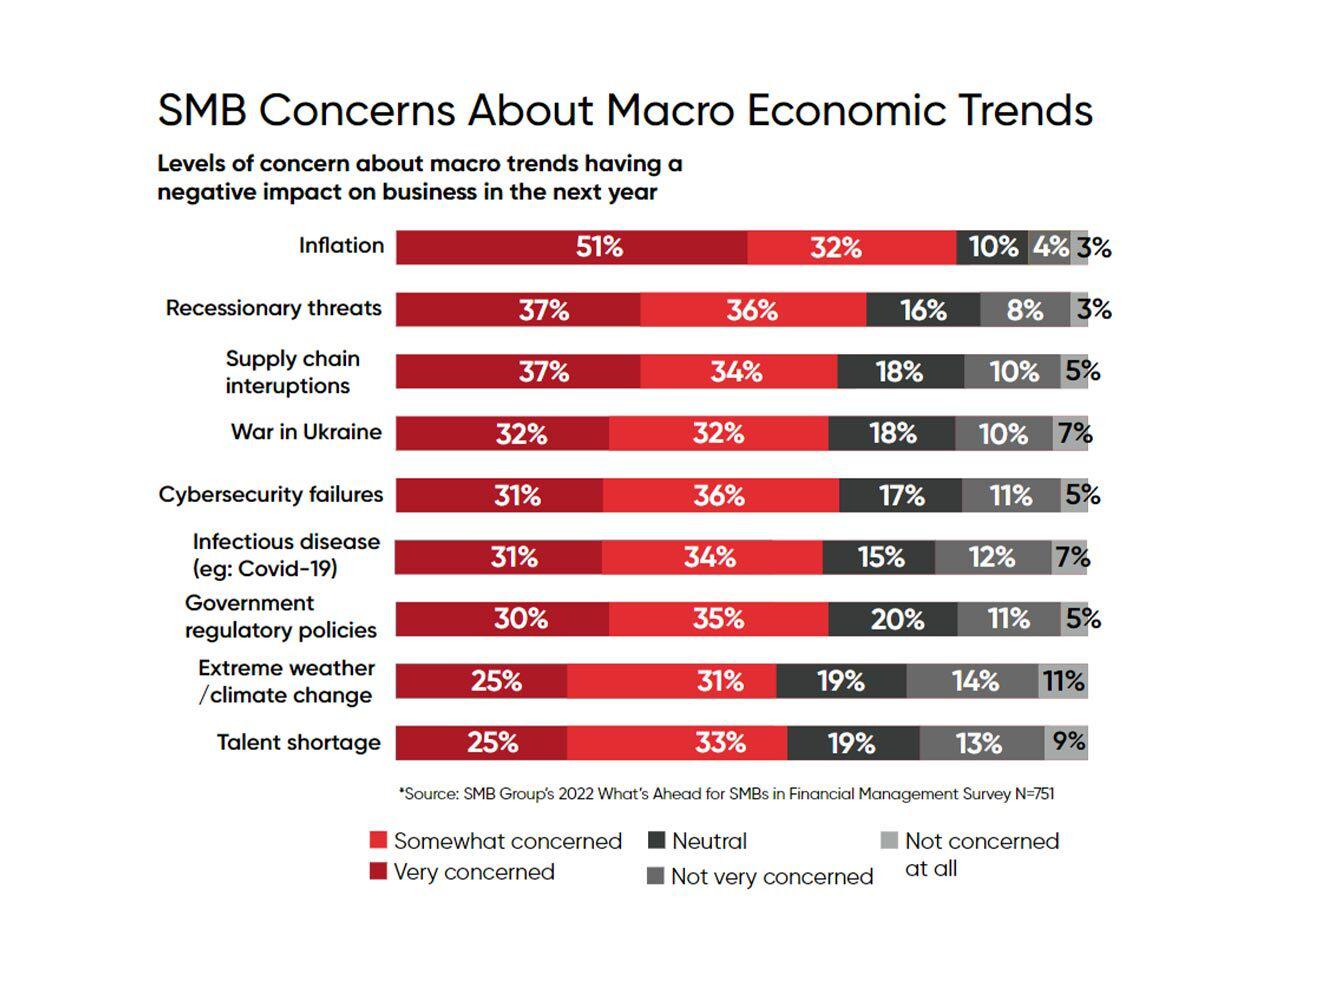 SMB Concerns About Macro Economic Trends